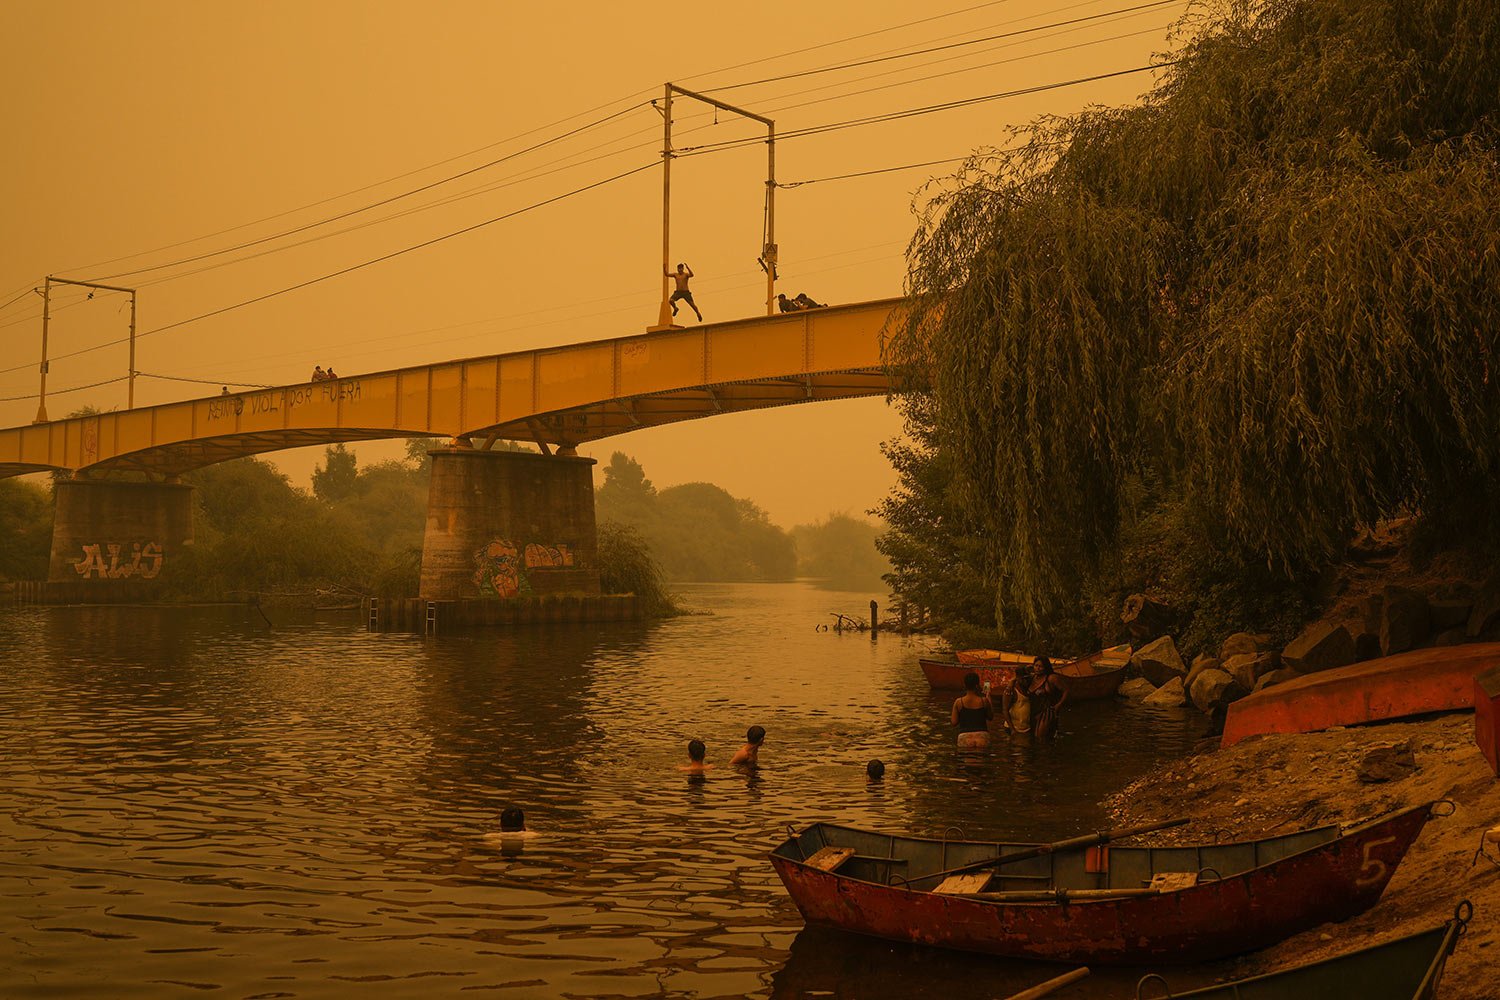  People wade in the Renaico river under a smoked-filled sky caused by wildfires, in Renaico, Chile, Saturday, Feb. 4, 2023. (AP Photo/Matias Delacroix) 